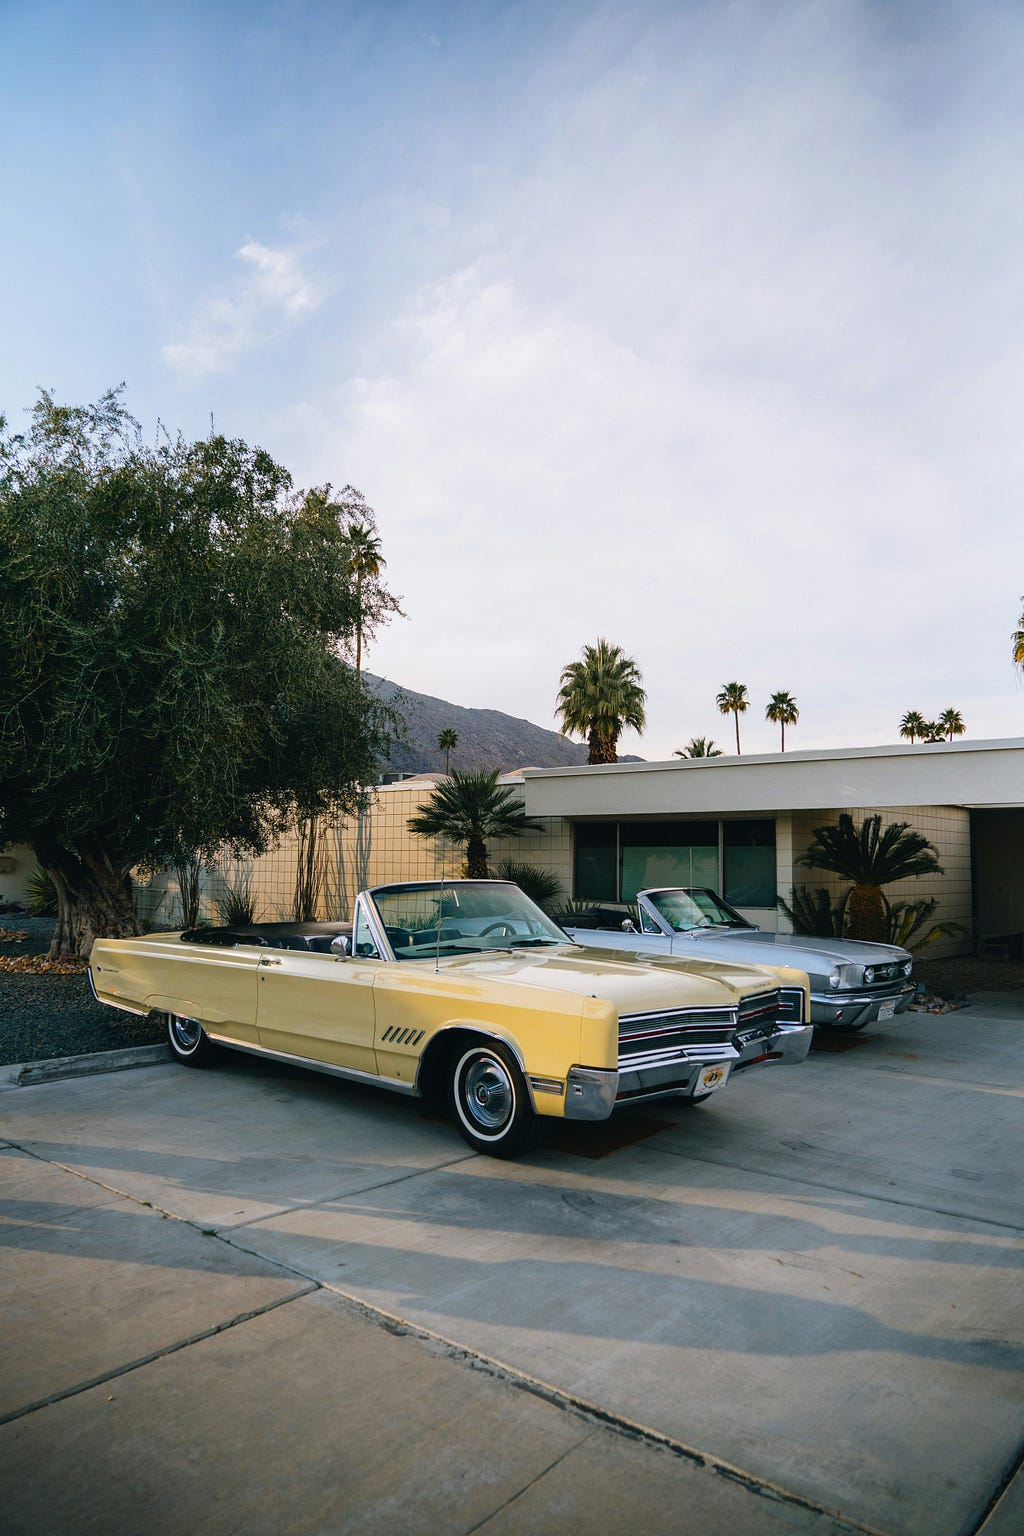 A vintage yellow convertible and a classic gray hardtop car parked on a driveway in front of a mid-century modern home, with palm trees and a mountainous backdrop under a clear sky, evoking the spirit of the American 1950s and 1960s.